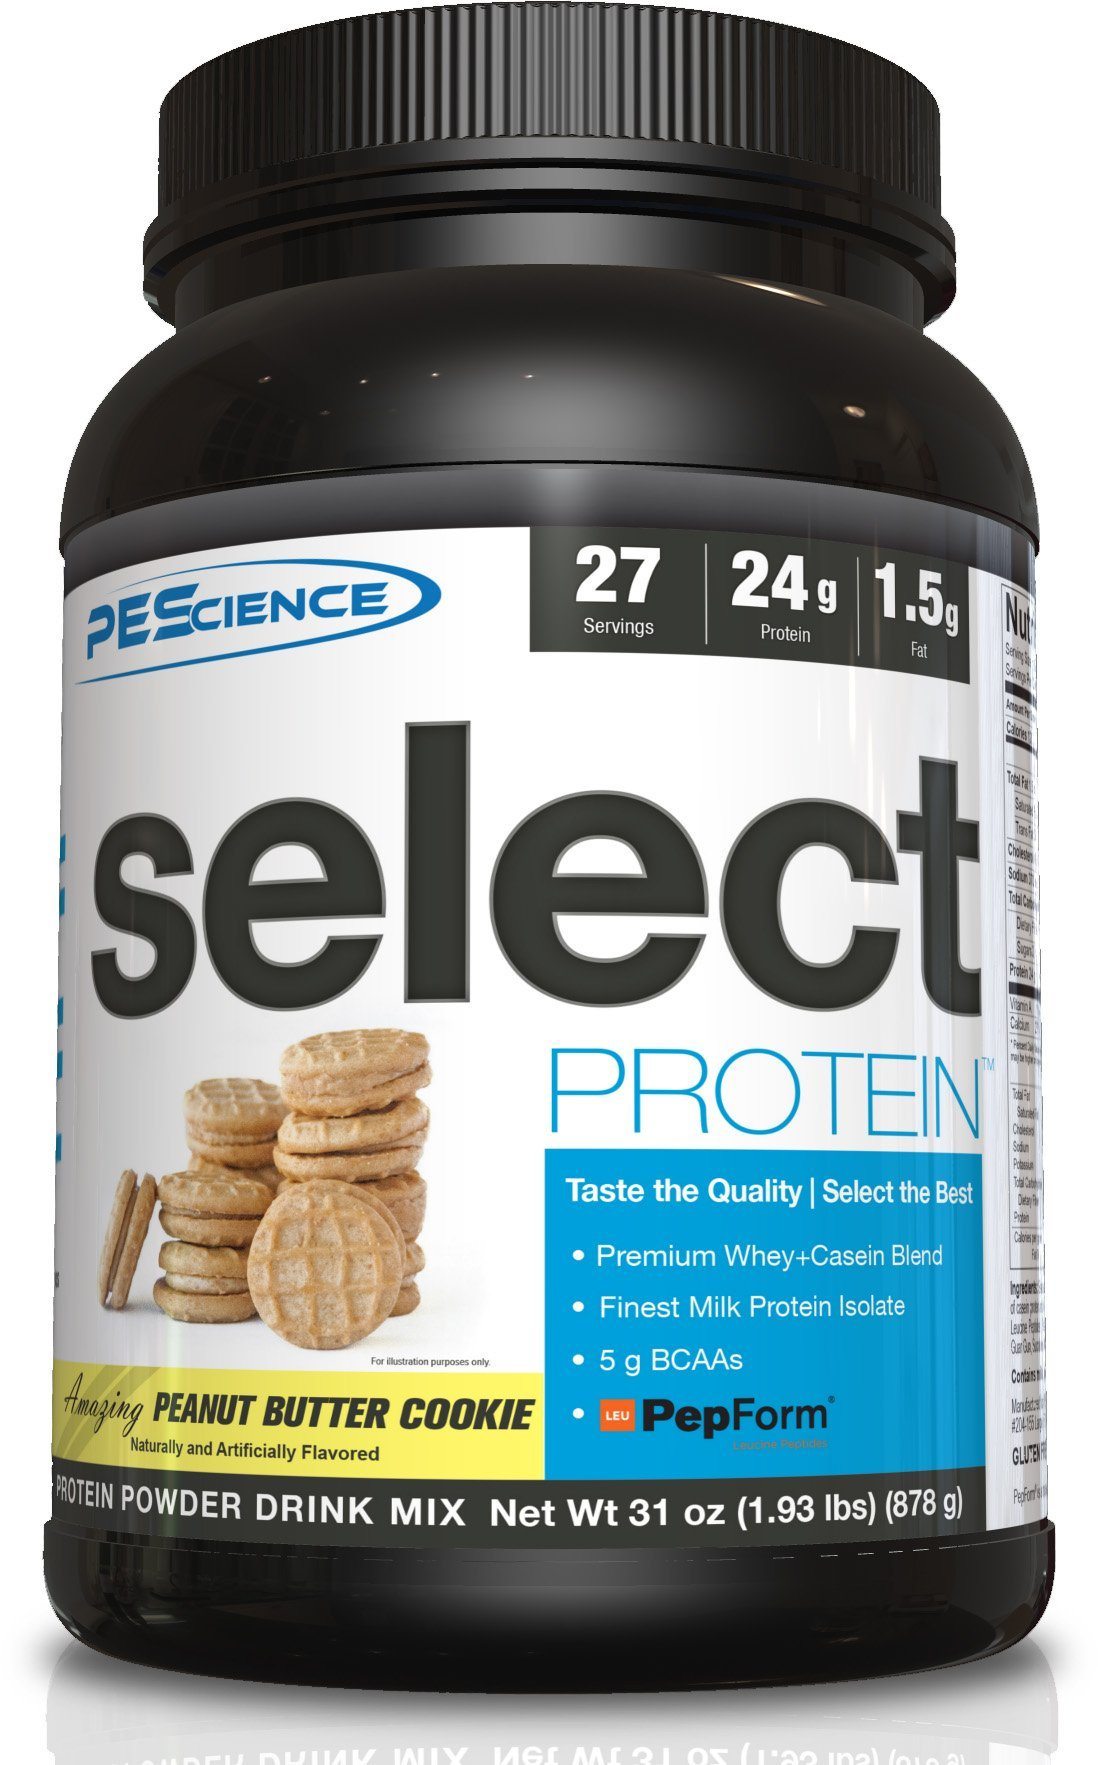 PEScience Select Protein Peanut Butter Cookie, 27 Servings, SNS Health, Sports Nutrition